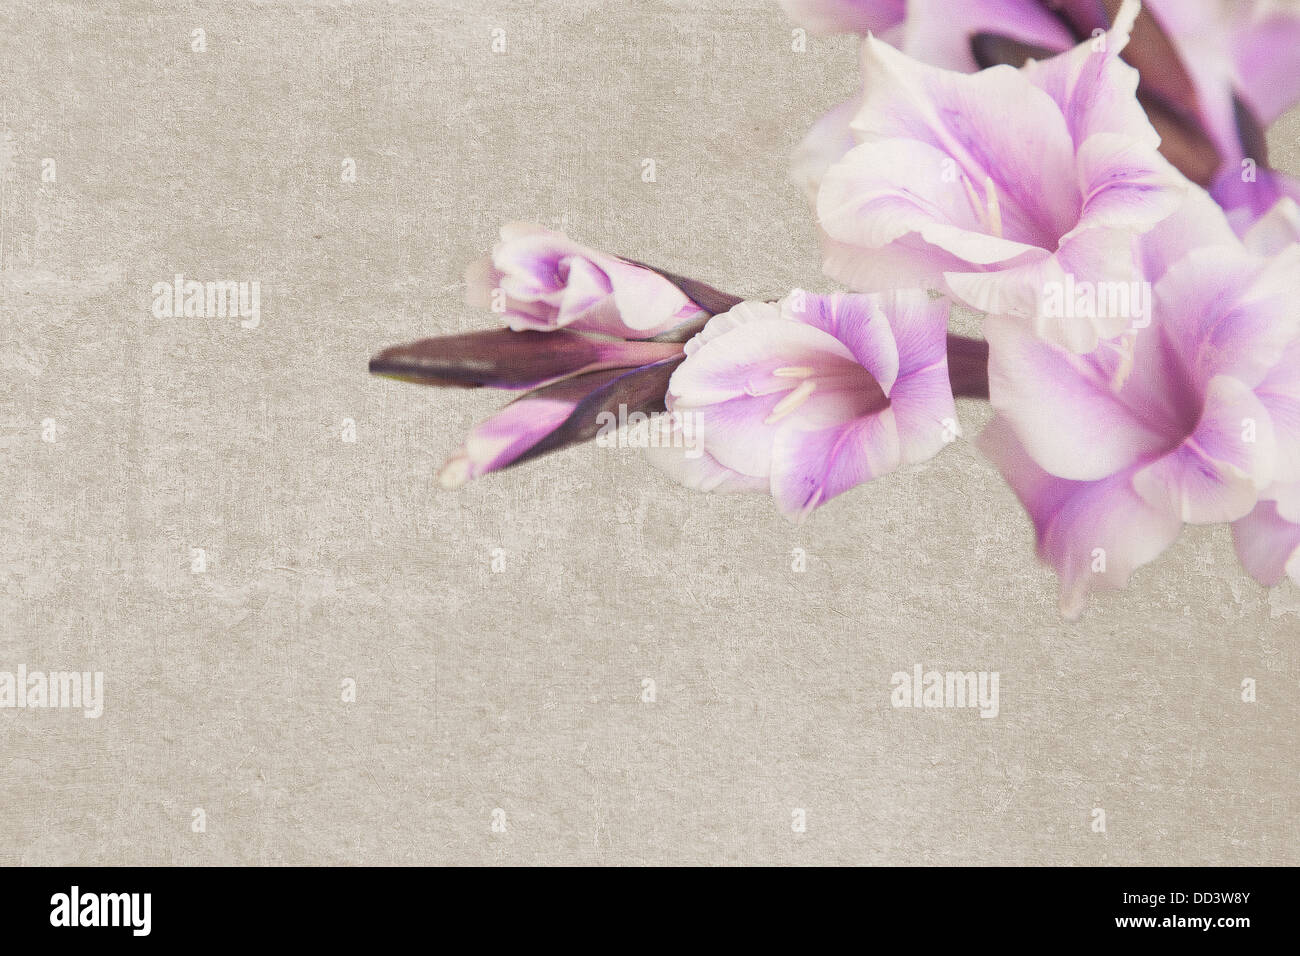 Abstract vintage background with a lilac flower of a gladiolus Stock Photo